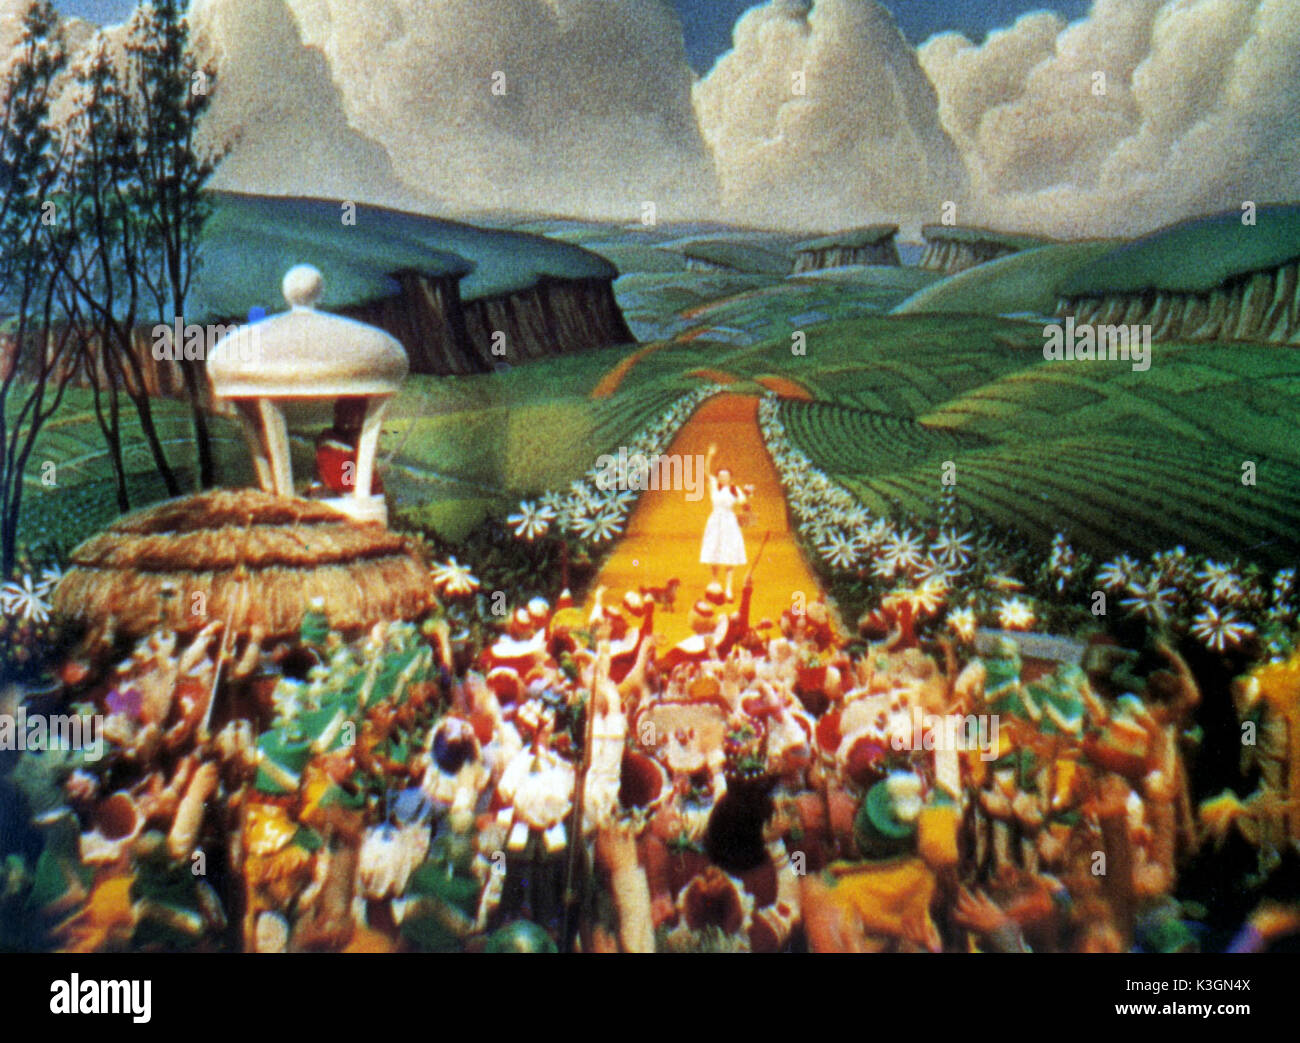 THE WIZARD OF OZ The yellow brick road     Date: 1939 Stock Photo